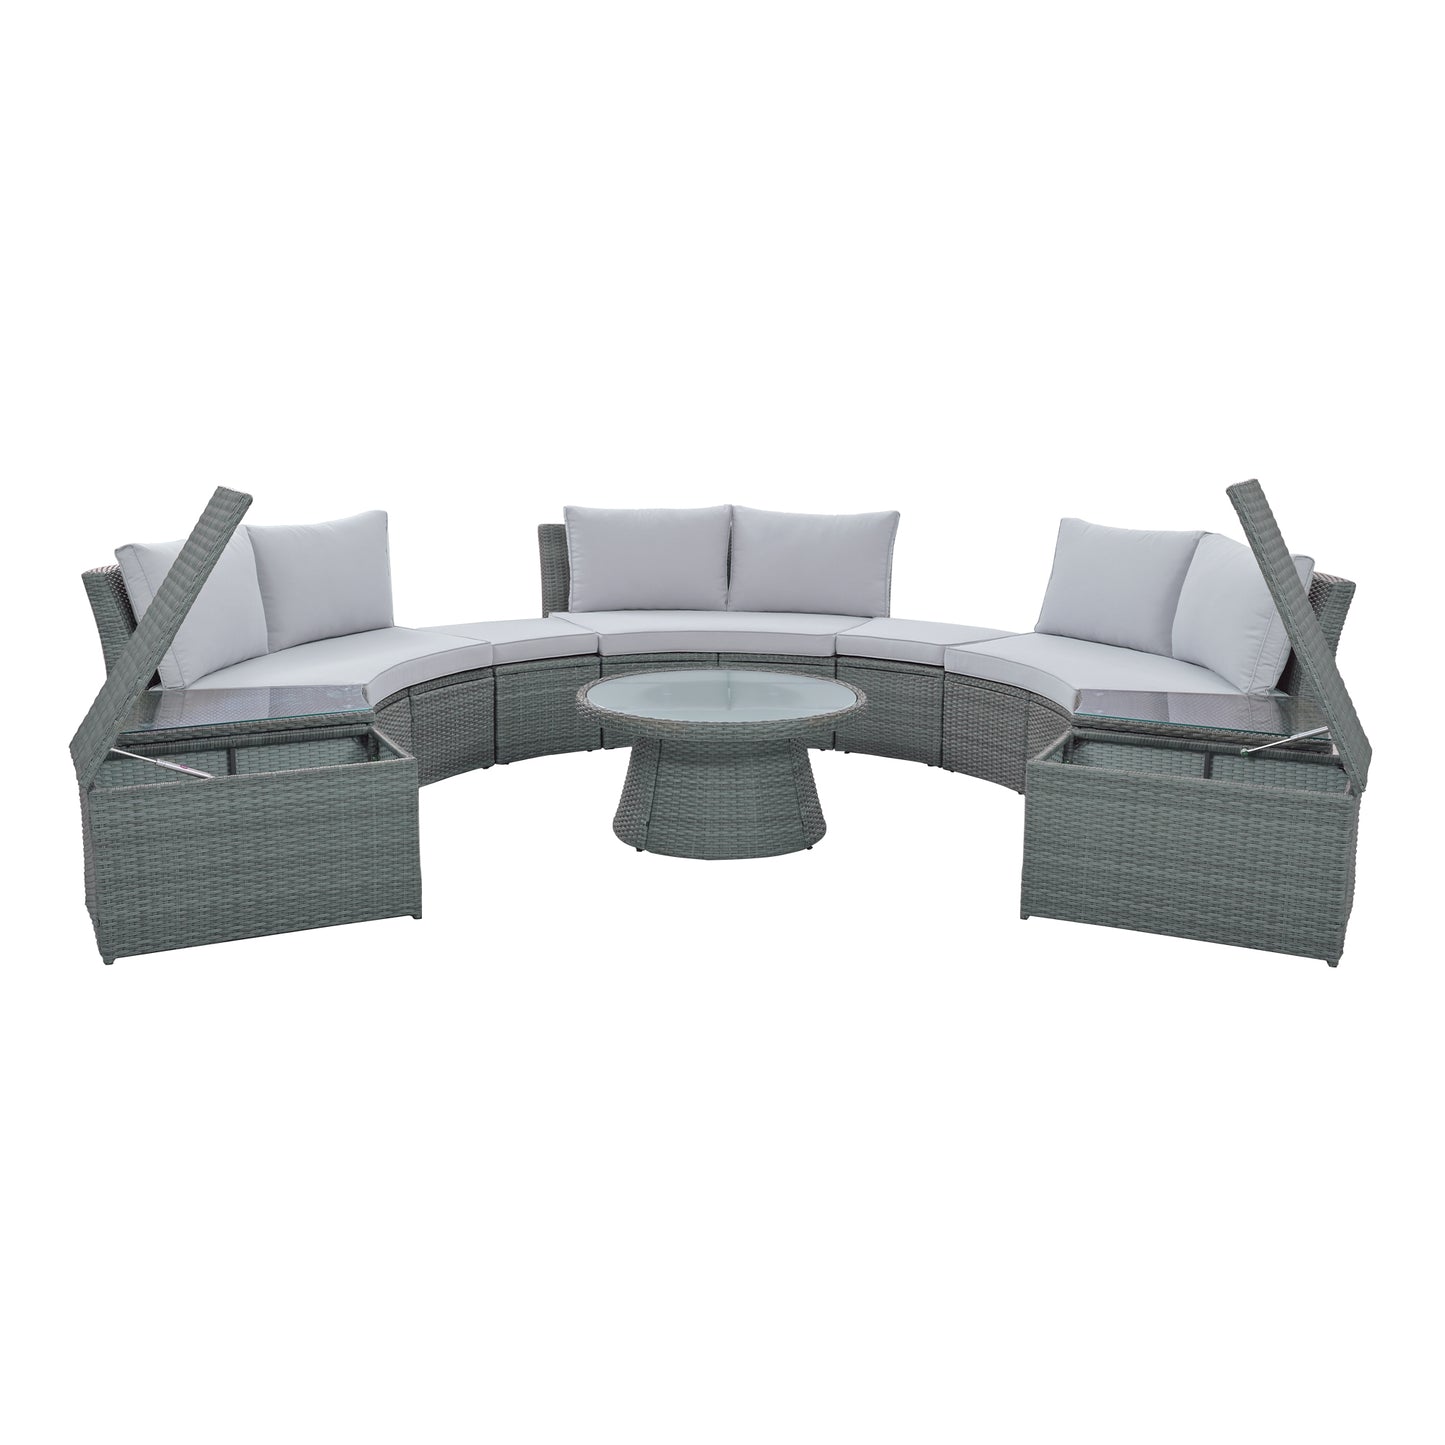 1st Choice 10-Piece Patio sofa set Crafted for Durability and Functionality